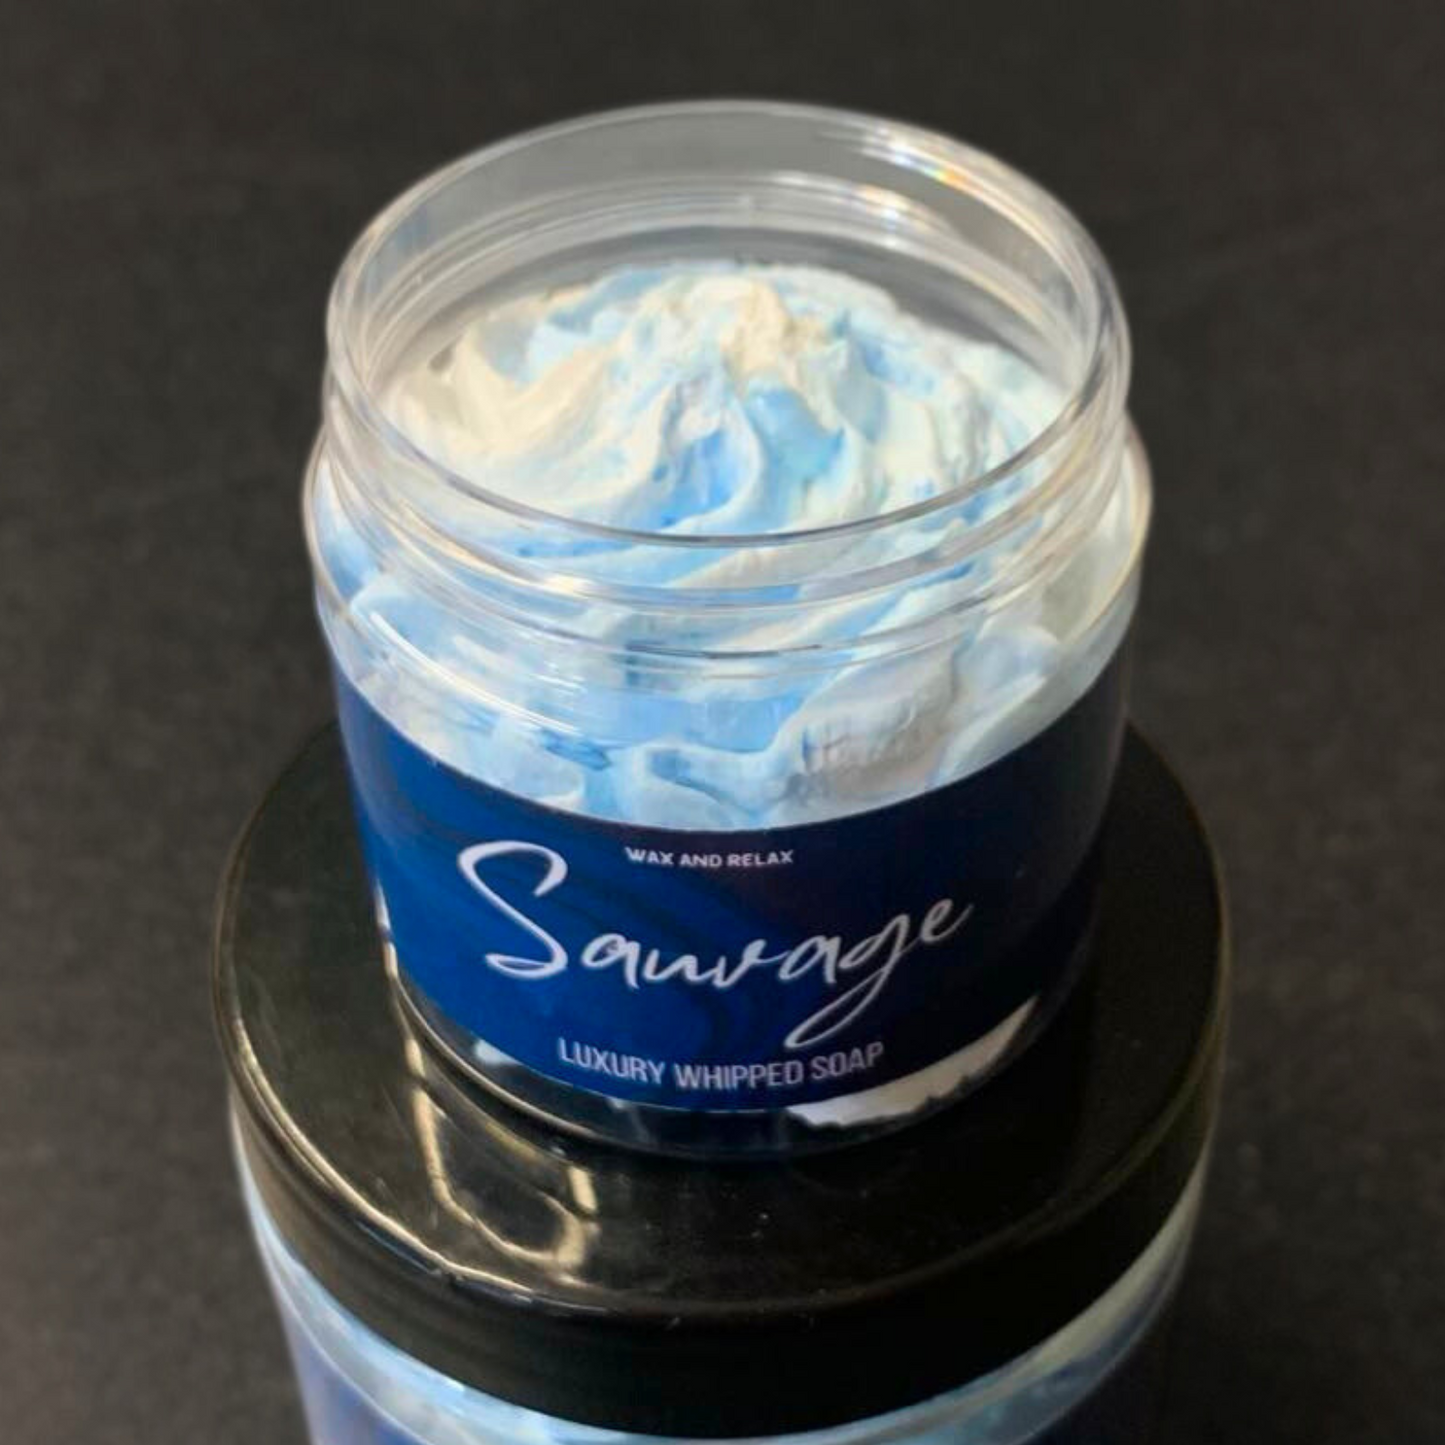 Sauvage Luxury Whipped Soap